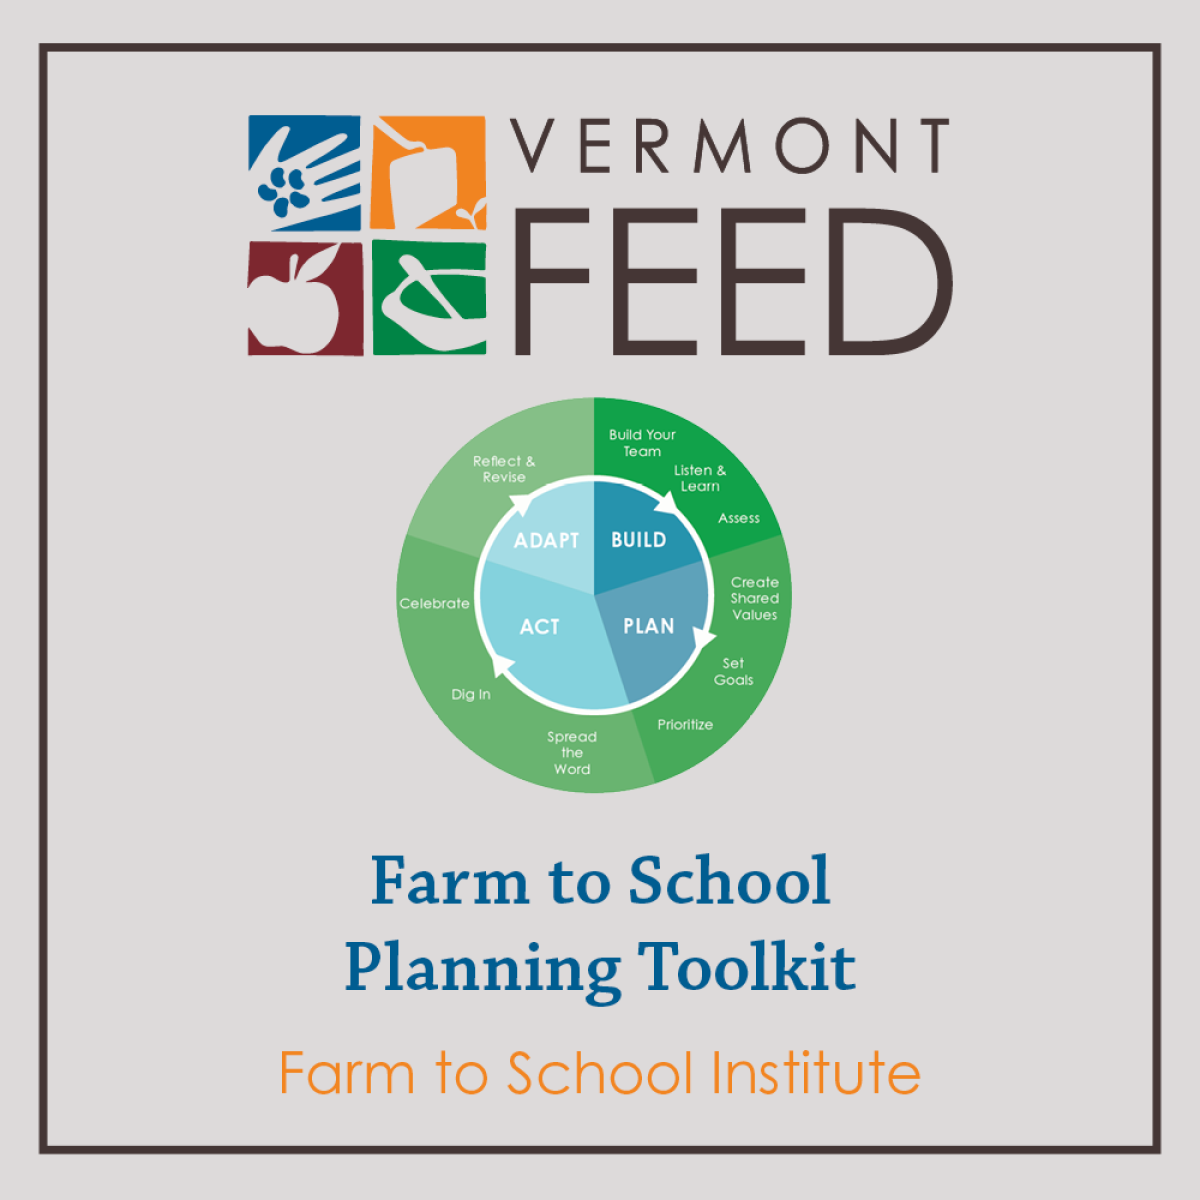 Vermont FEED's Farm to School Planning Toolkit